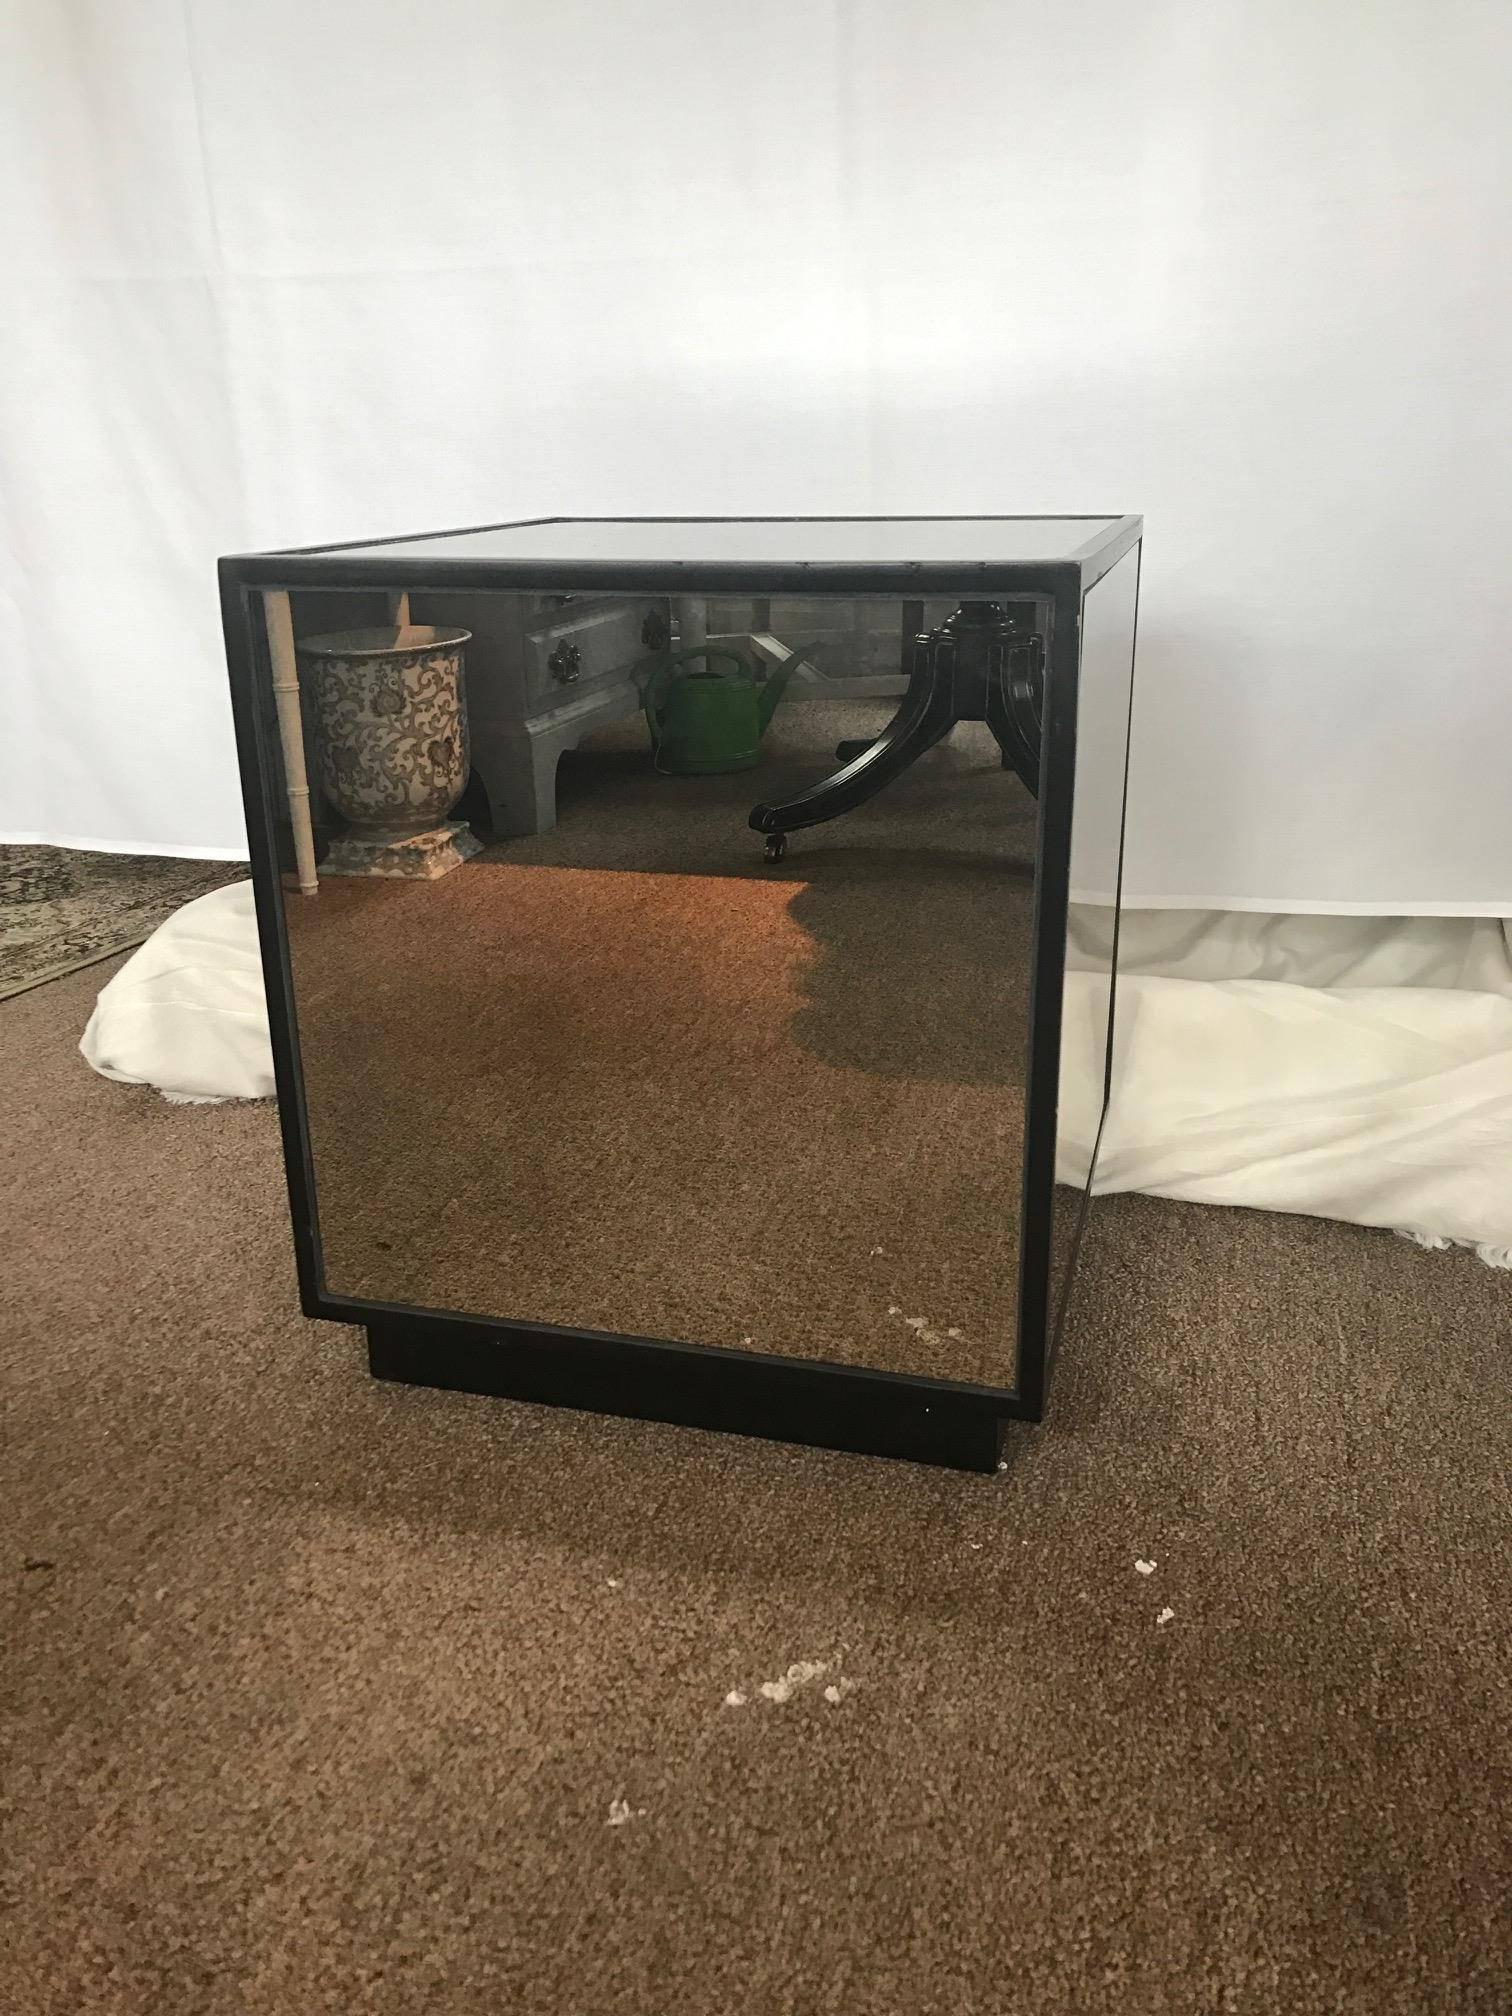 Ralph Lauren style antiqued glass cube side table modern design Hollywood Regency feel! Mirrored. Resting atop a wooden platform - this piece will add soft glamour to any room.